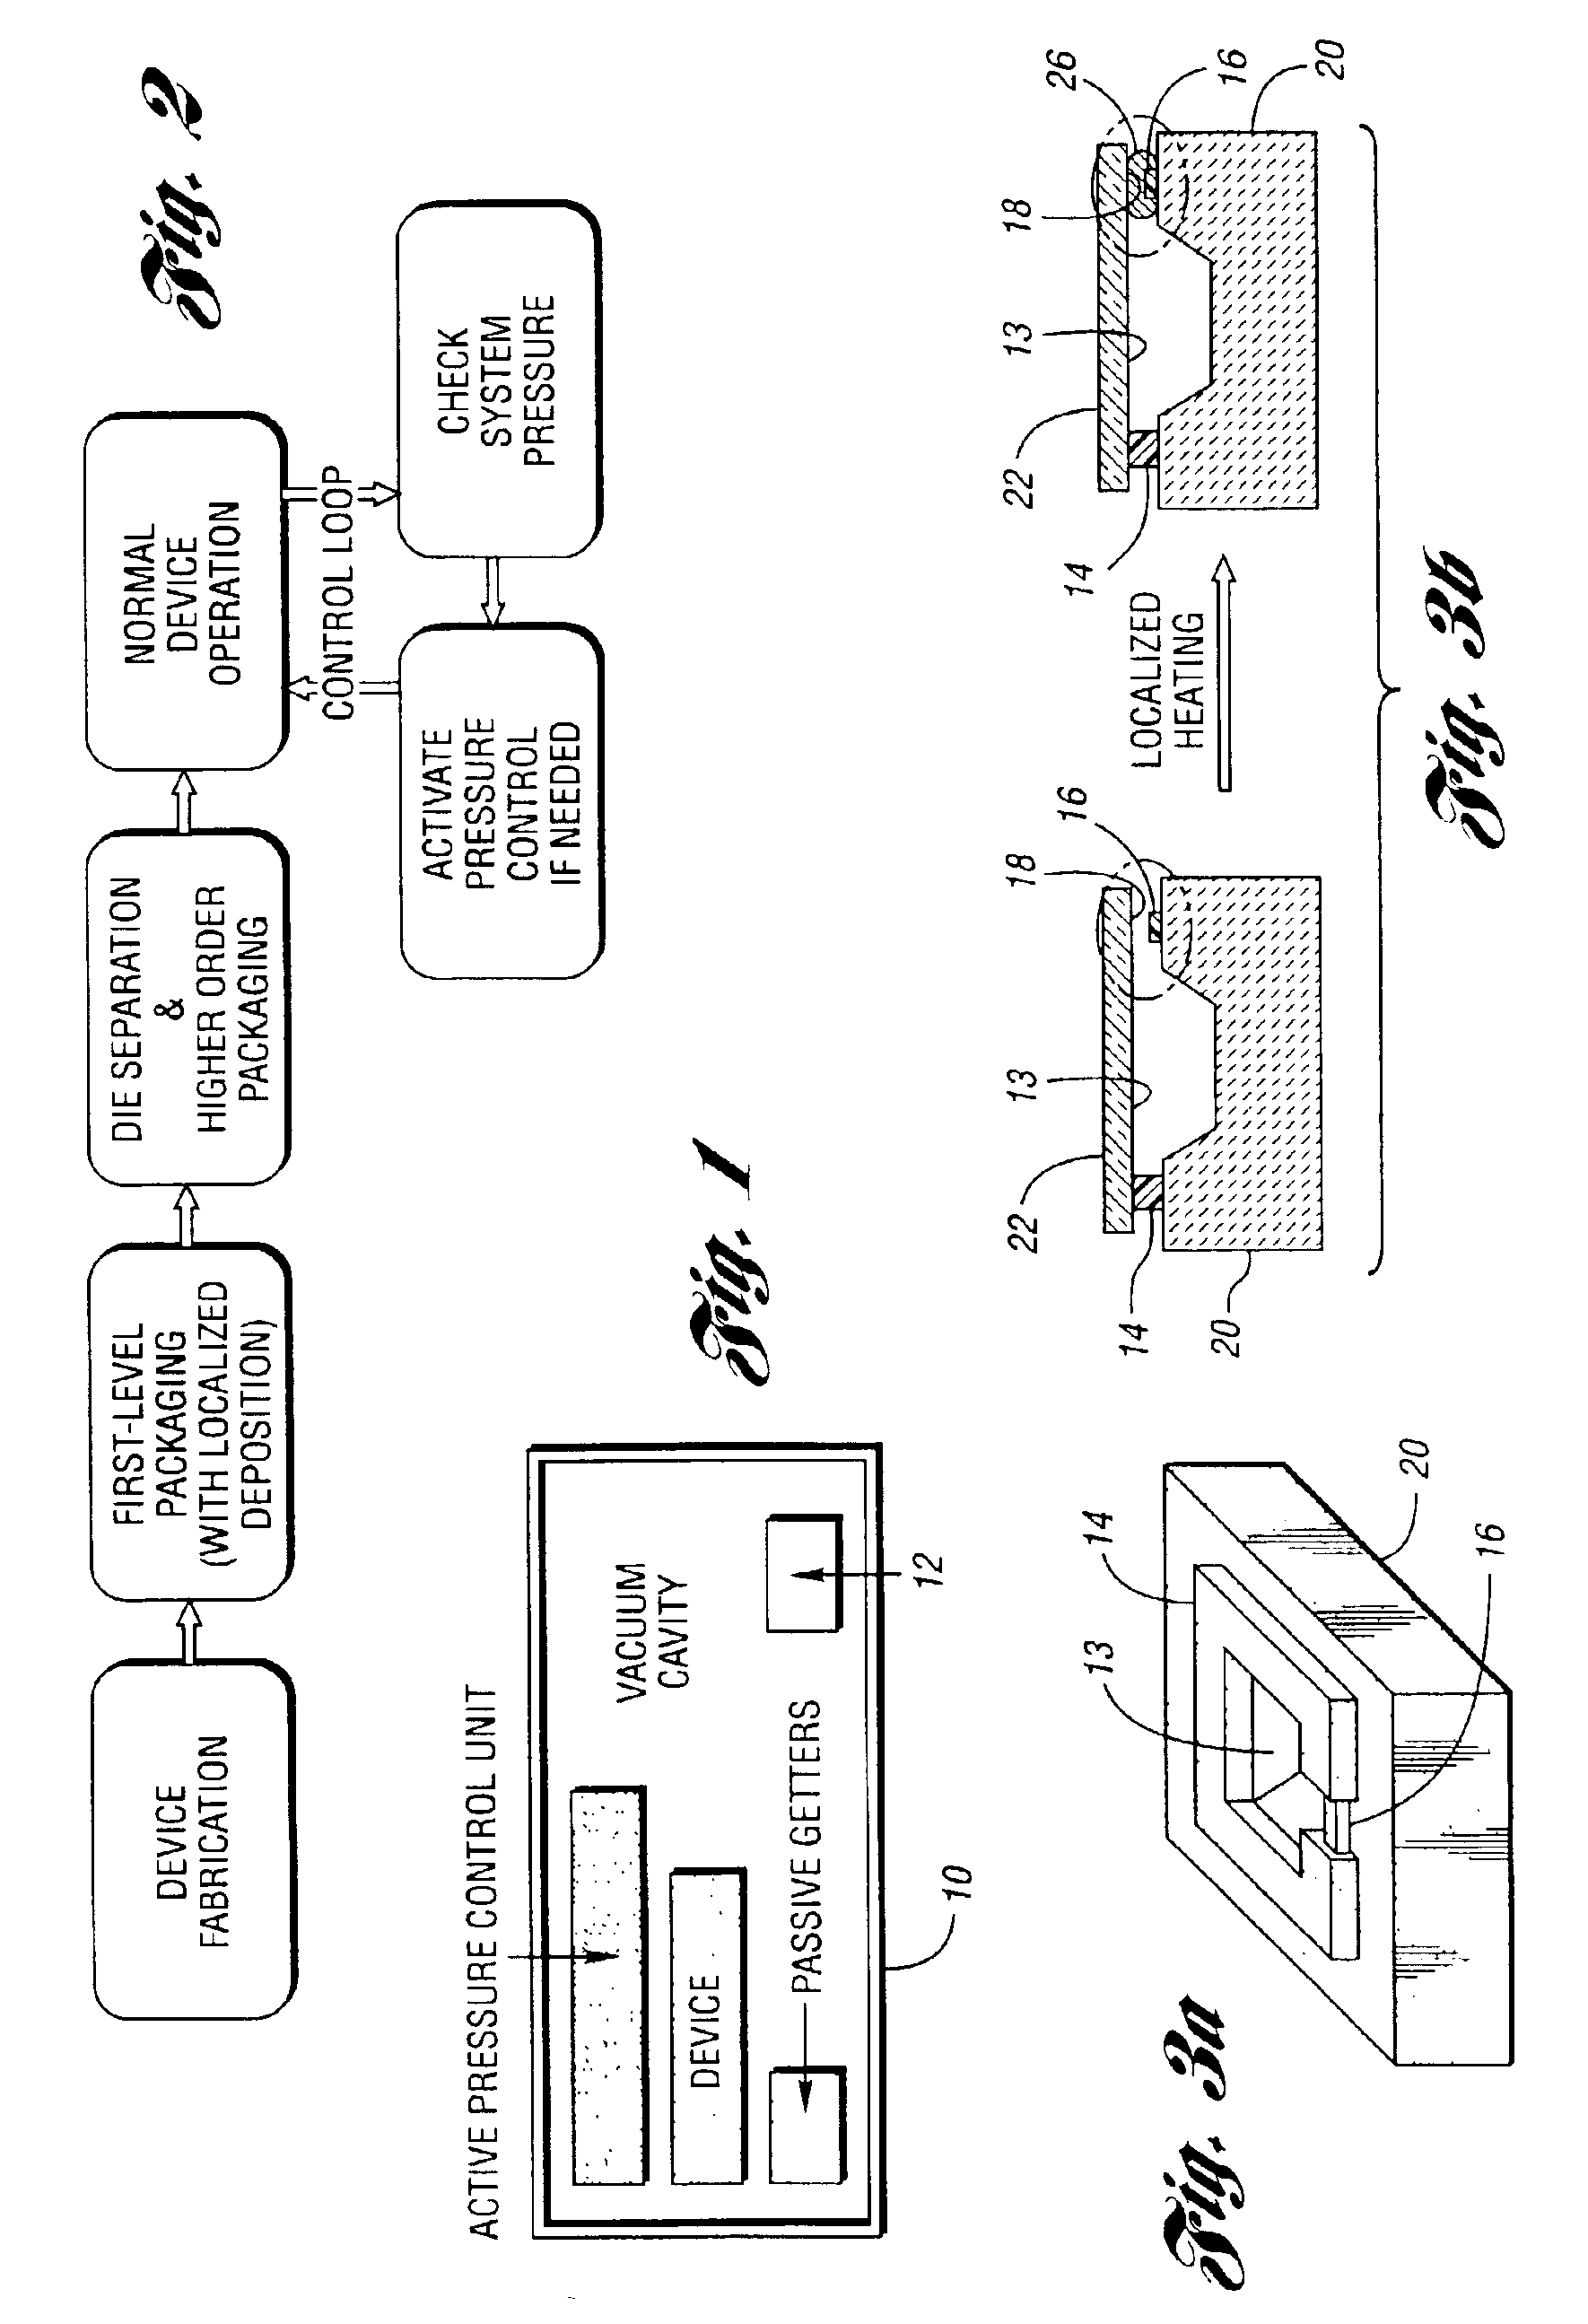 Method and system for locally sealing a vacuum microcavity, methods and systems for monitoring and controlling pressure and method and system for trimming resonant frequency of a microstructure therein